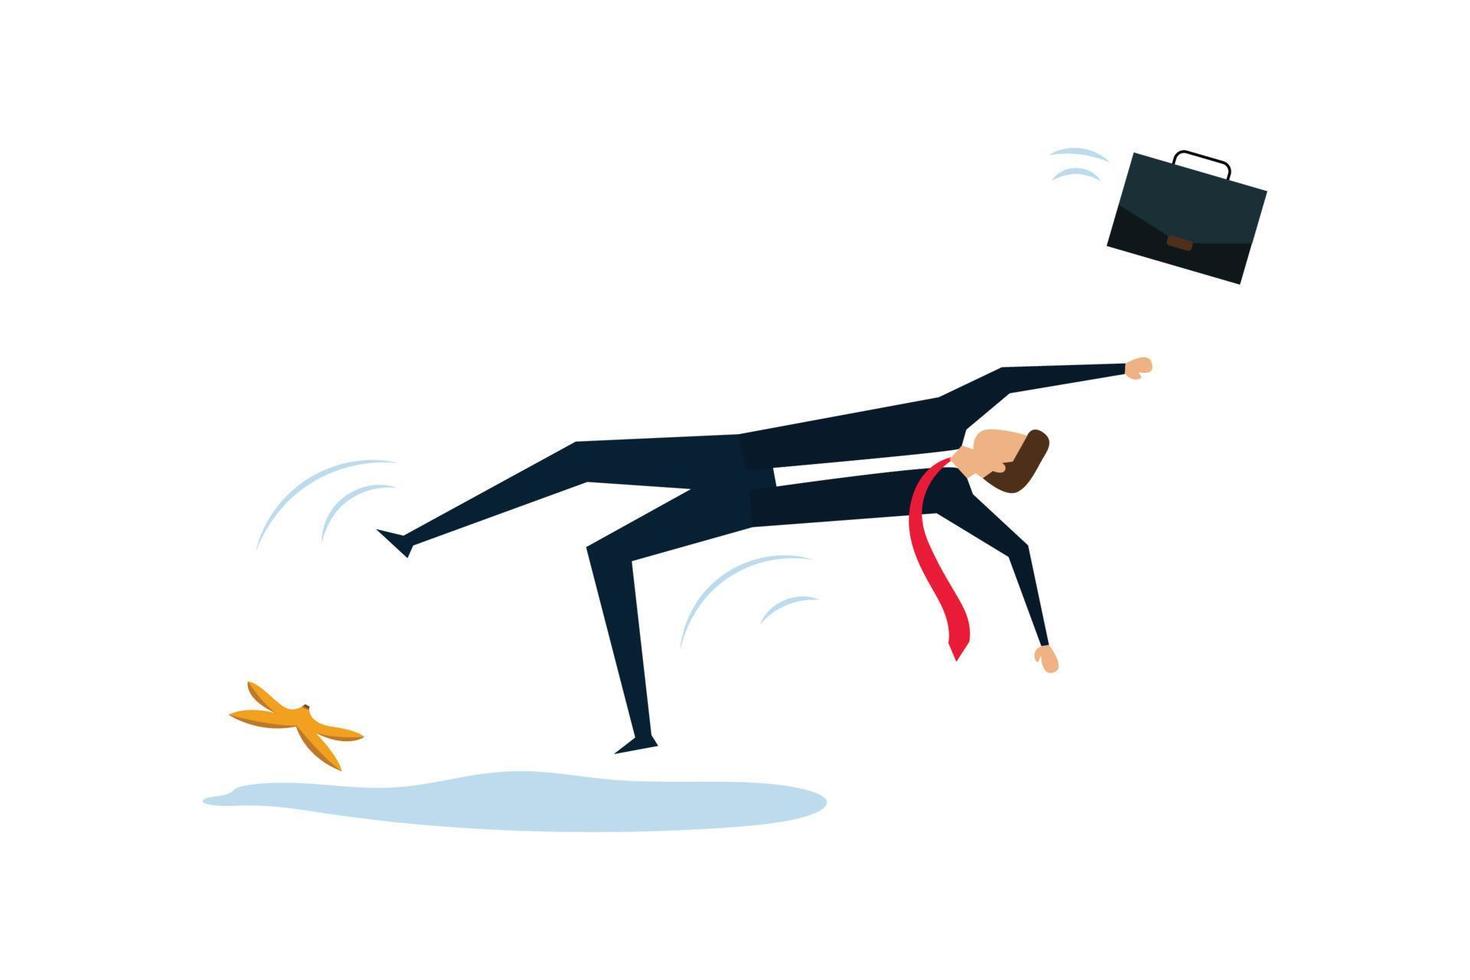 Business mistake or accident, insurance. businessman running and slipping with big banana peels on the ground. vector